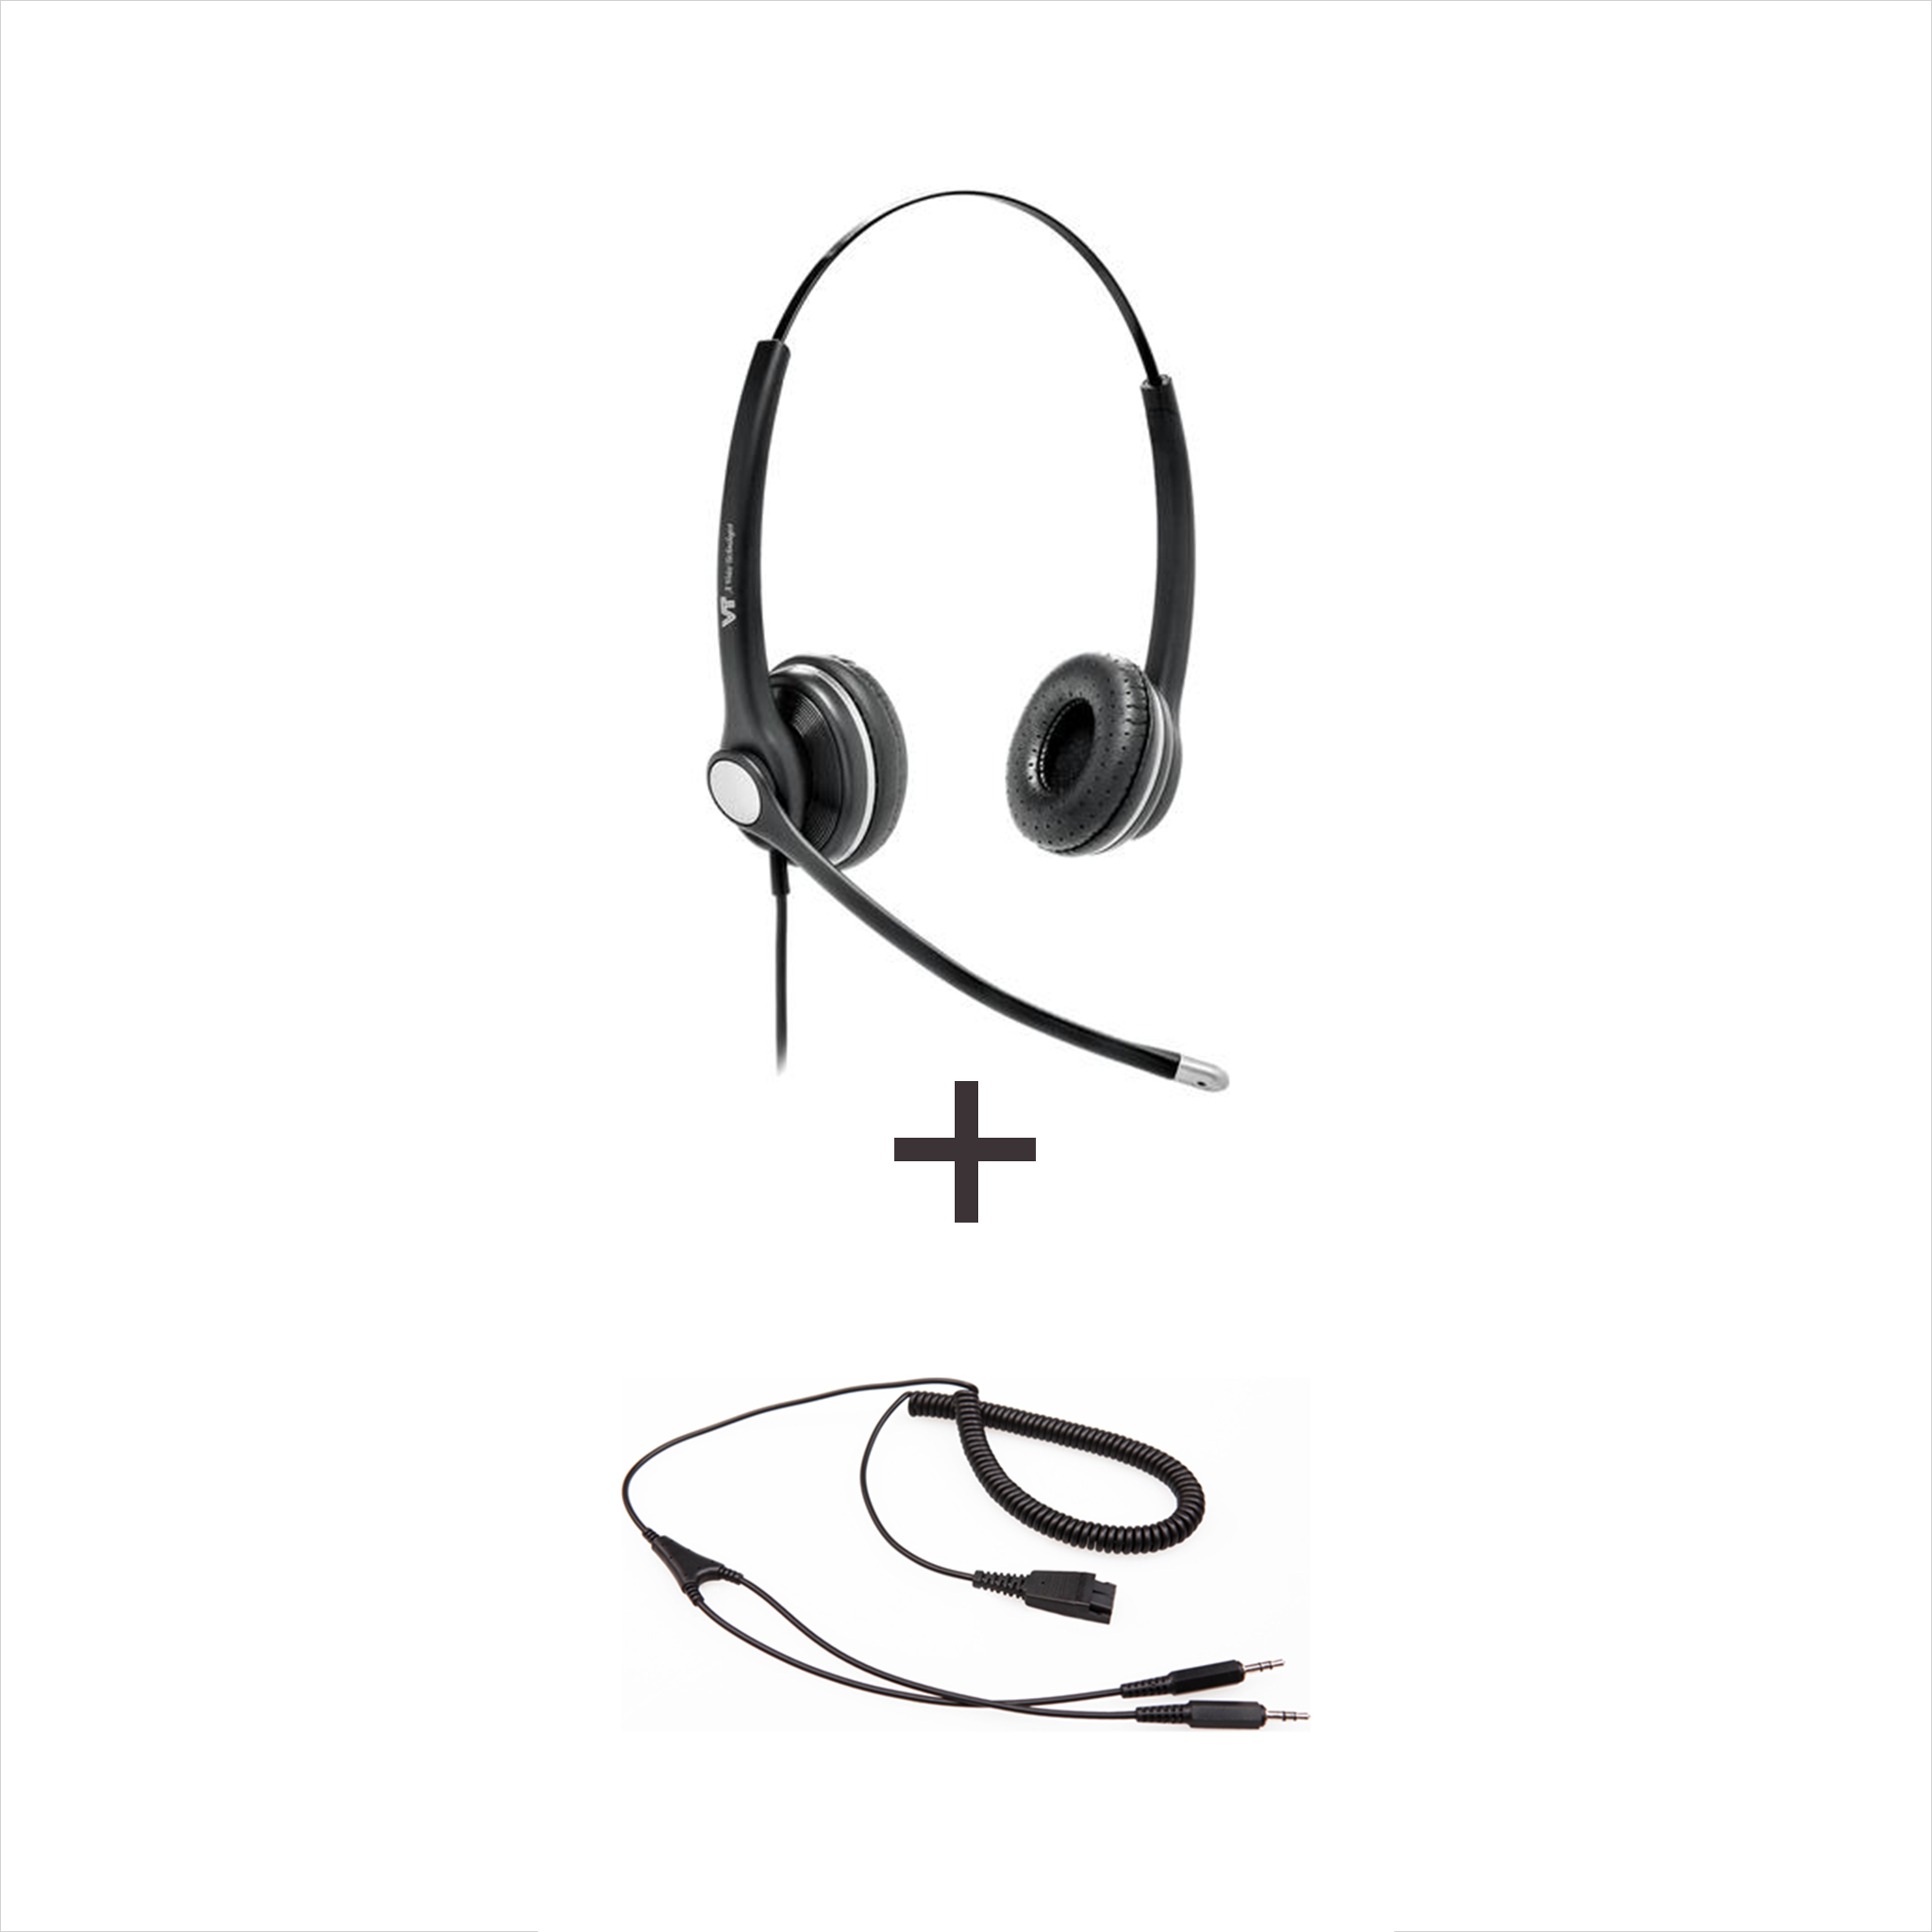 VT8000 Headset - VBeT Wired headset VT8000 Duo UNC | AL-VoIP Store+ Qd- 2*3.5Mm Pc Plug - Headsets